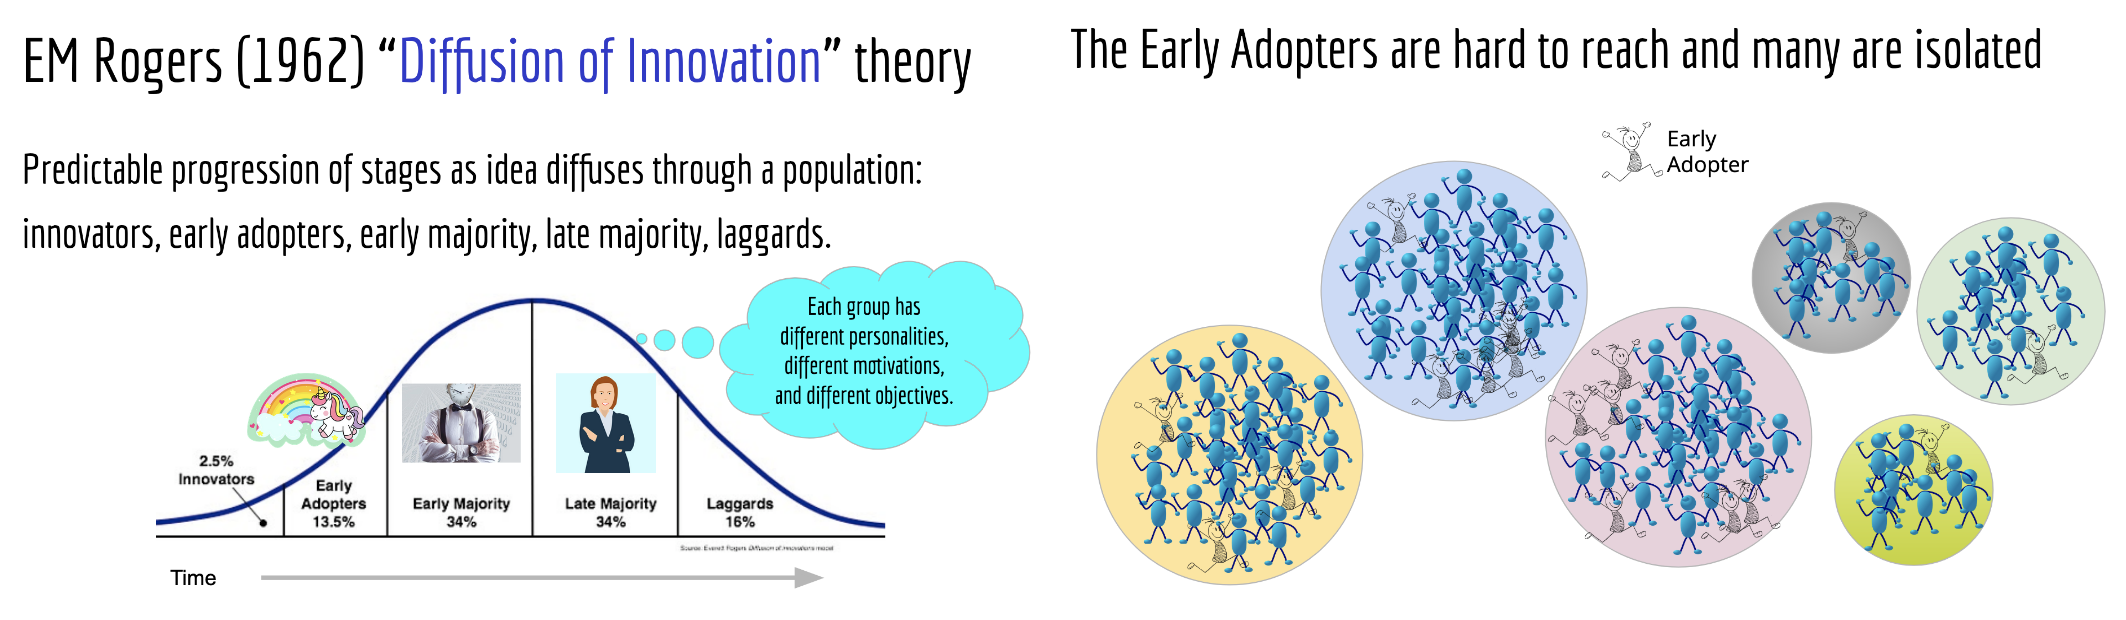 Left image showing diffusion of innovation theory shows a bell curve that is labeled left to right with innovators as the 2.5%, early adopters as 13.5%, early majority as 34%, late majority as 34%, and laggards as the final 16%. Right image showing circles full of cartoon people, some of whom are colored grey as early adopters and are isolated.